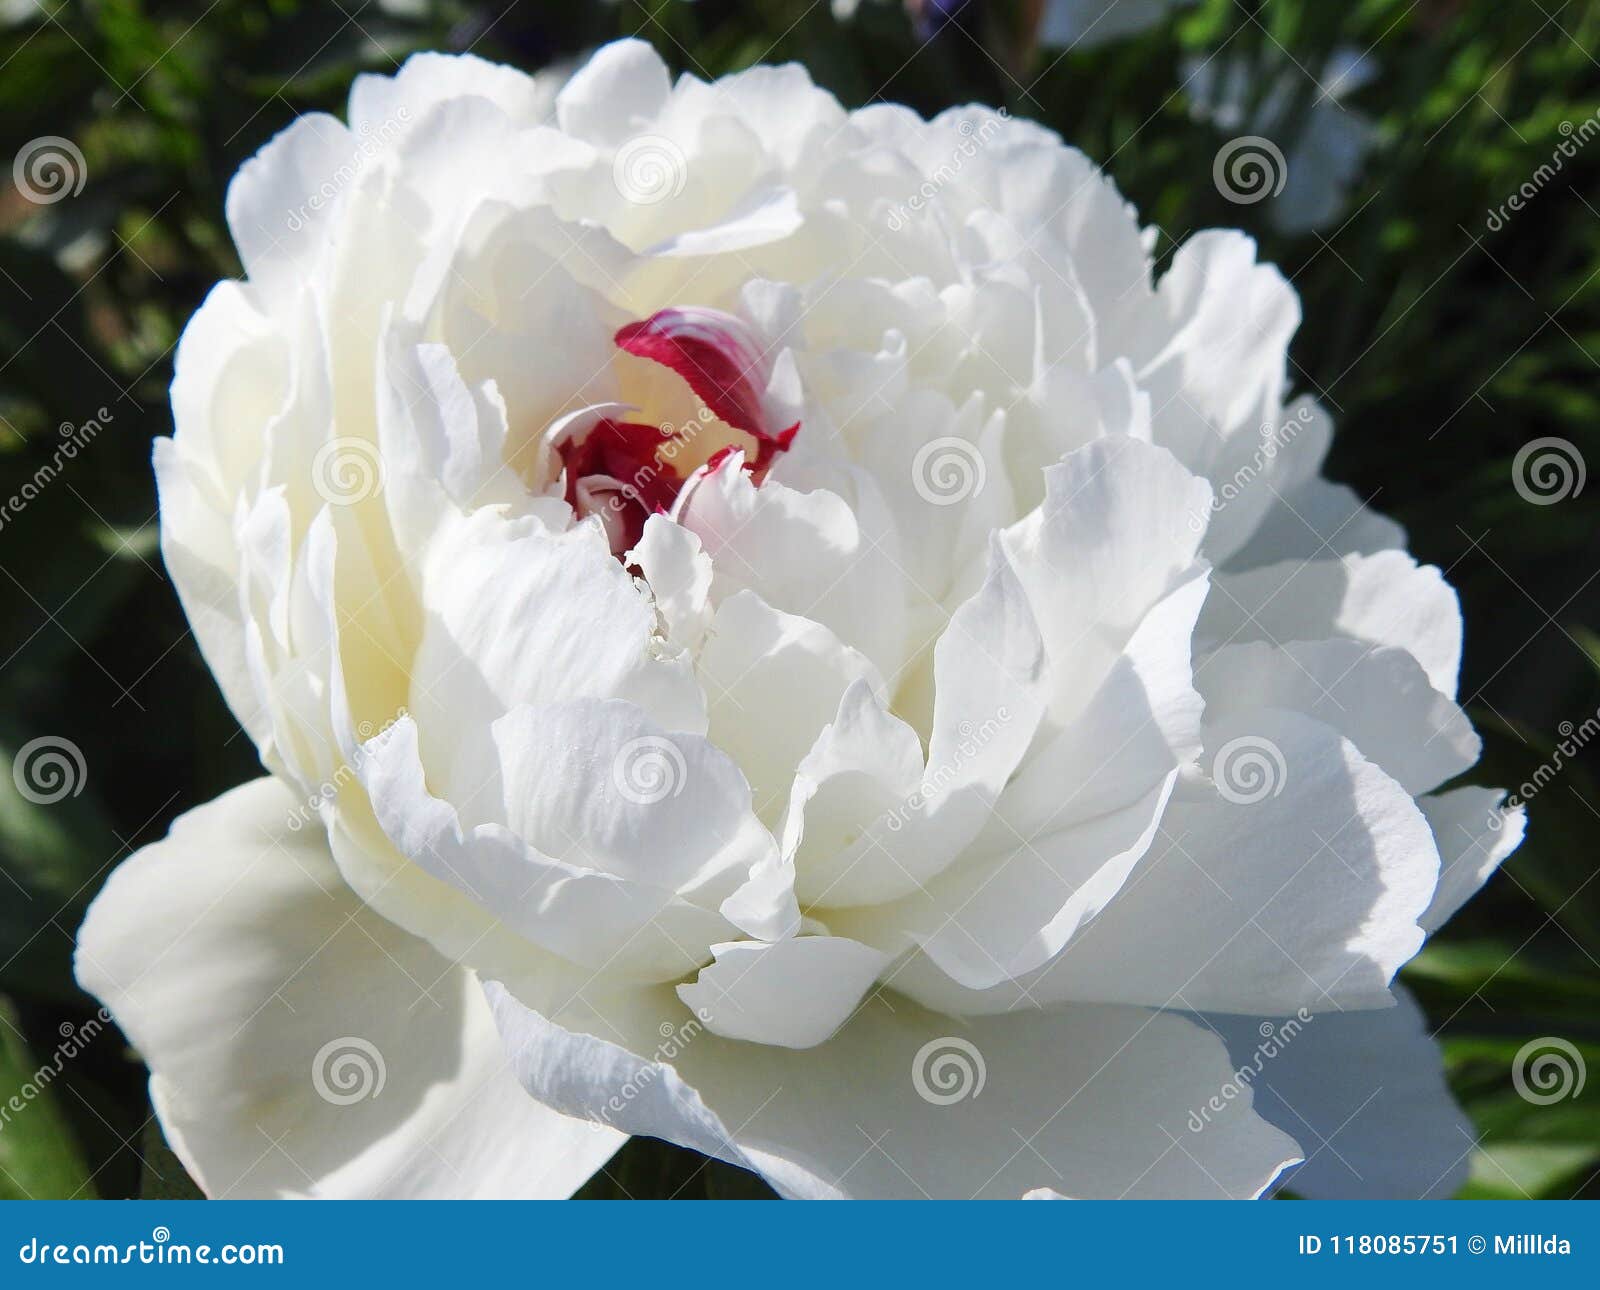 White Peony Flower in Garden, Lithuania Stock Image - Image of ...